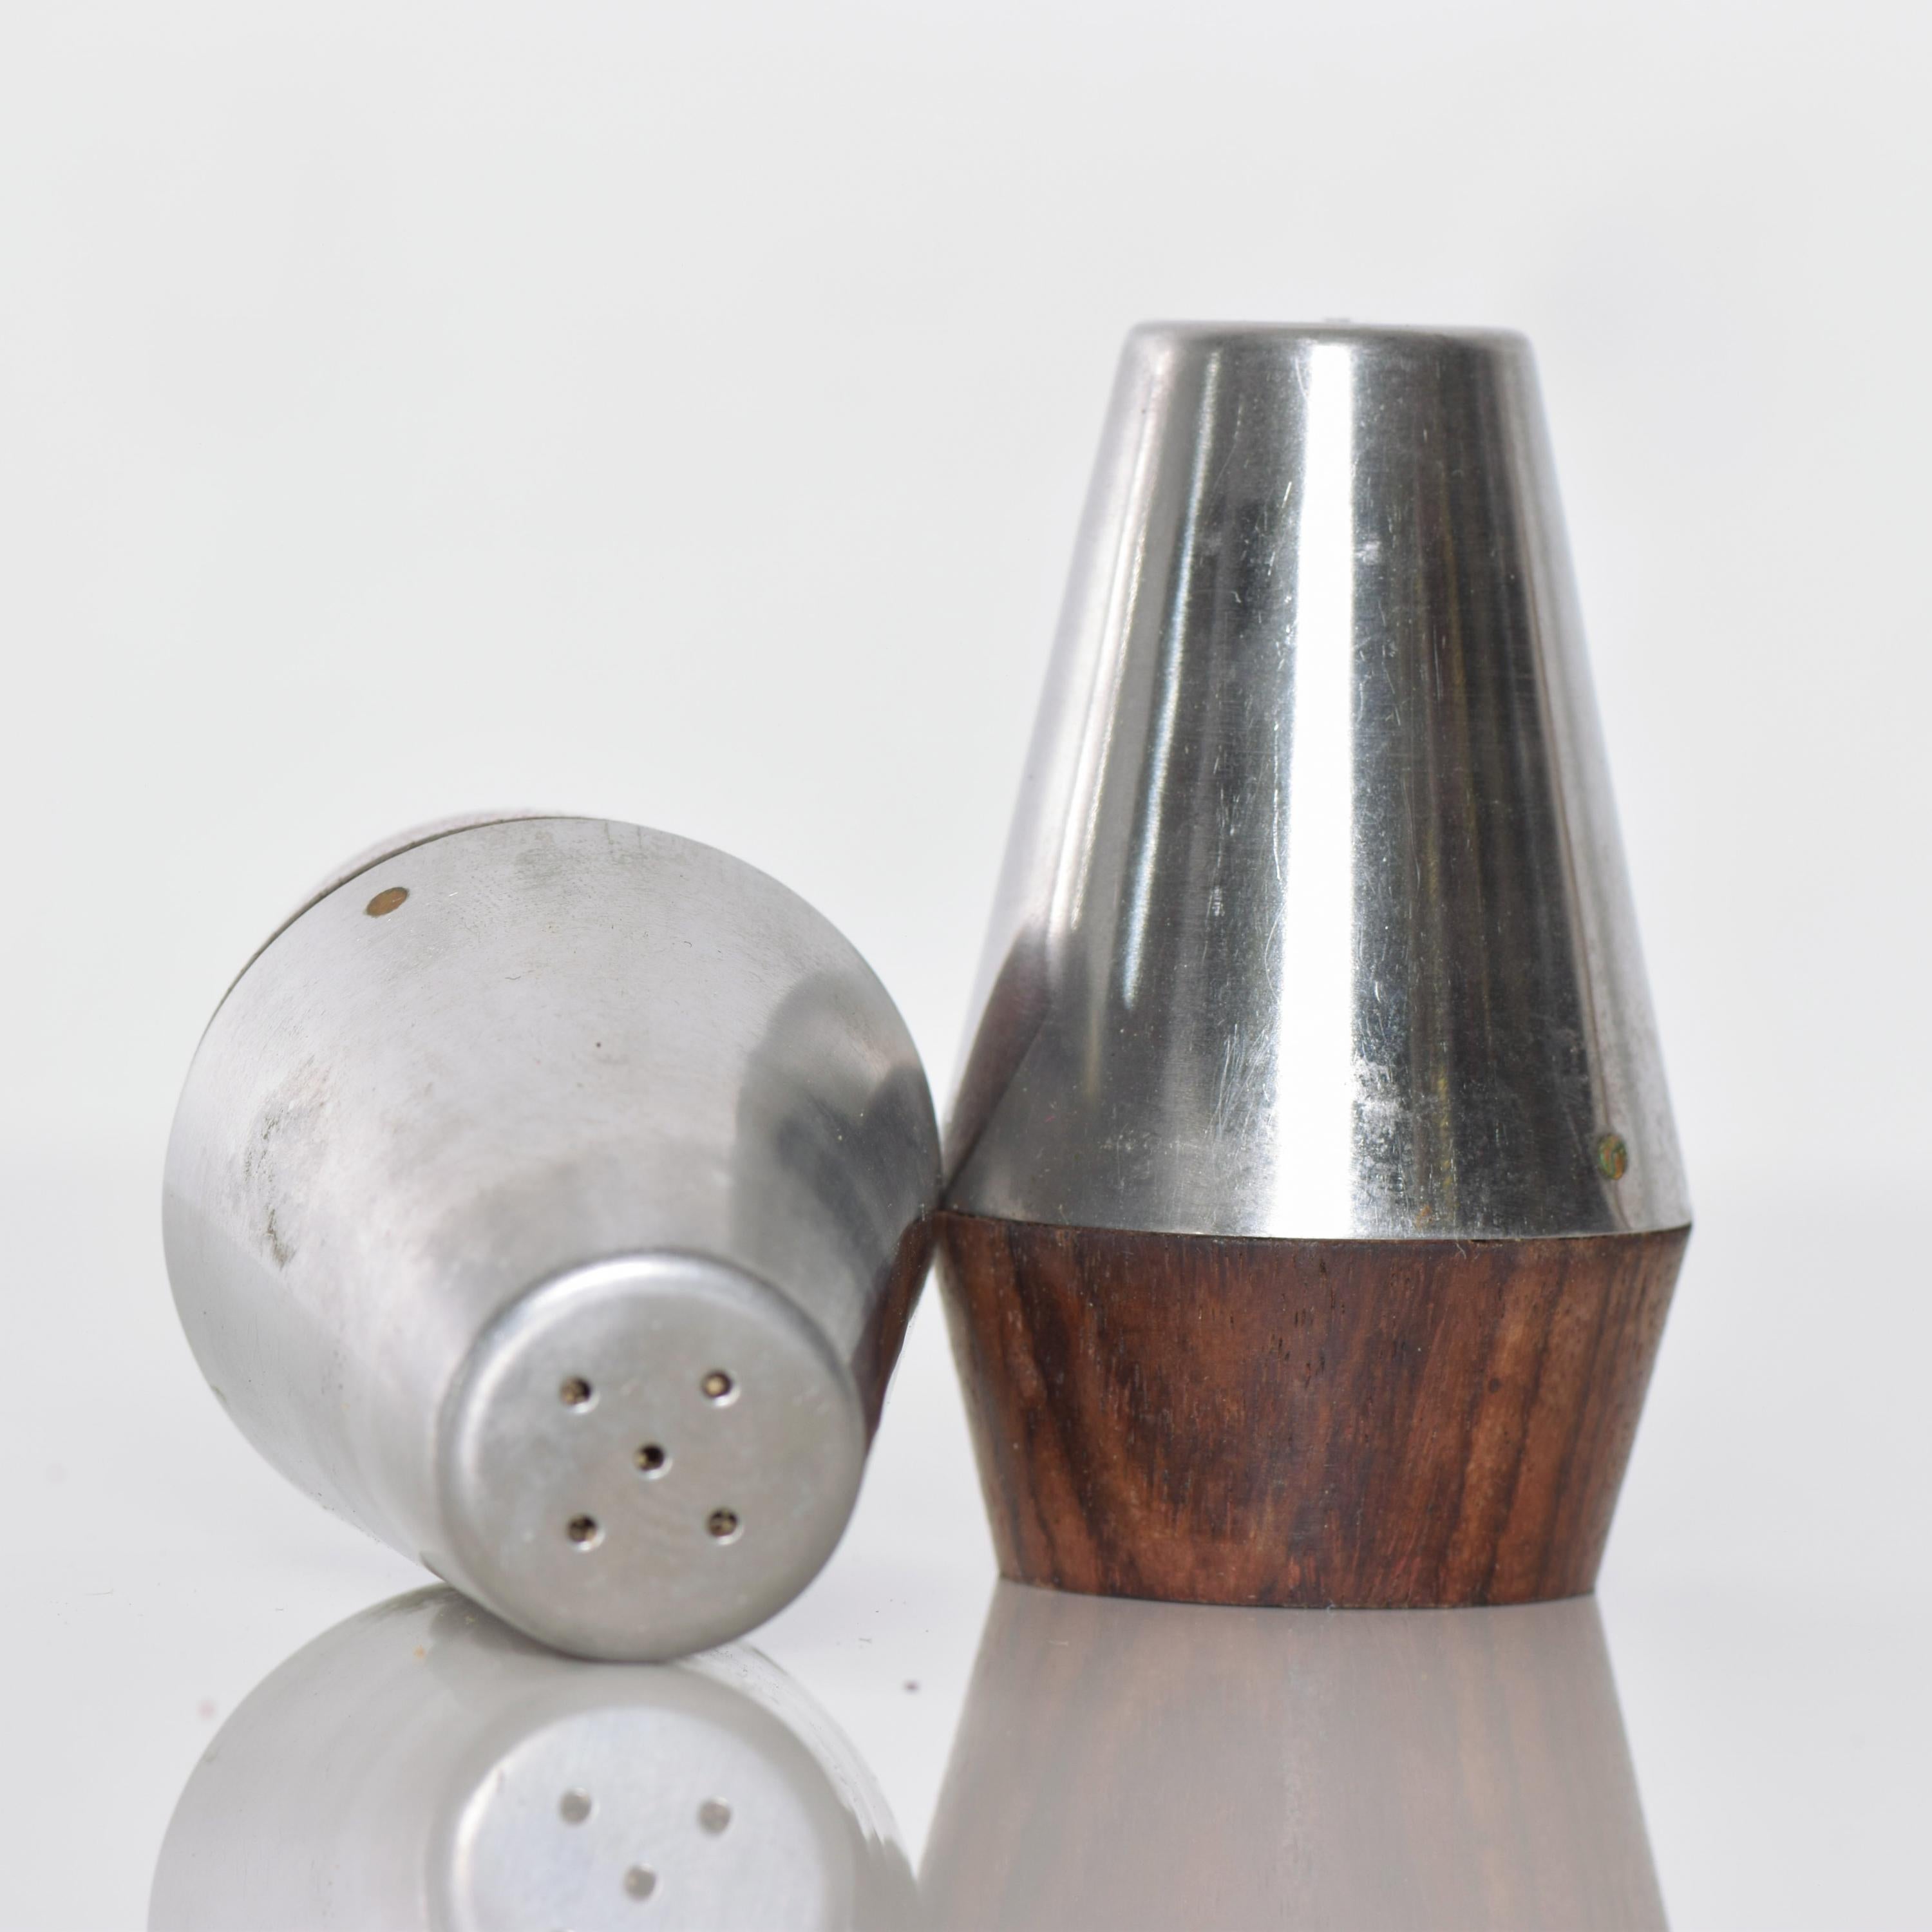 Japanese  Stainless Steel & Rosewood Salt Pepper Shaker Set 1960s Style of AB Lundtofte